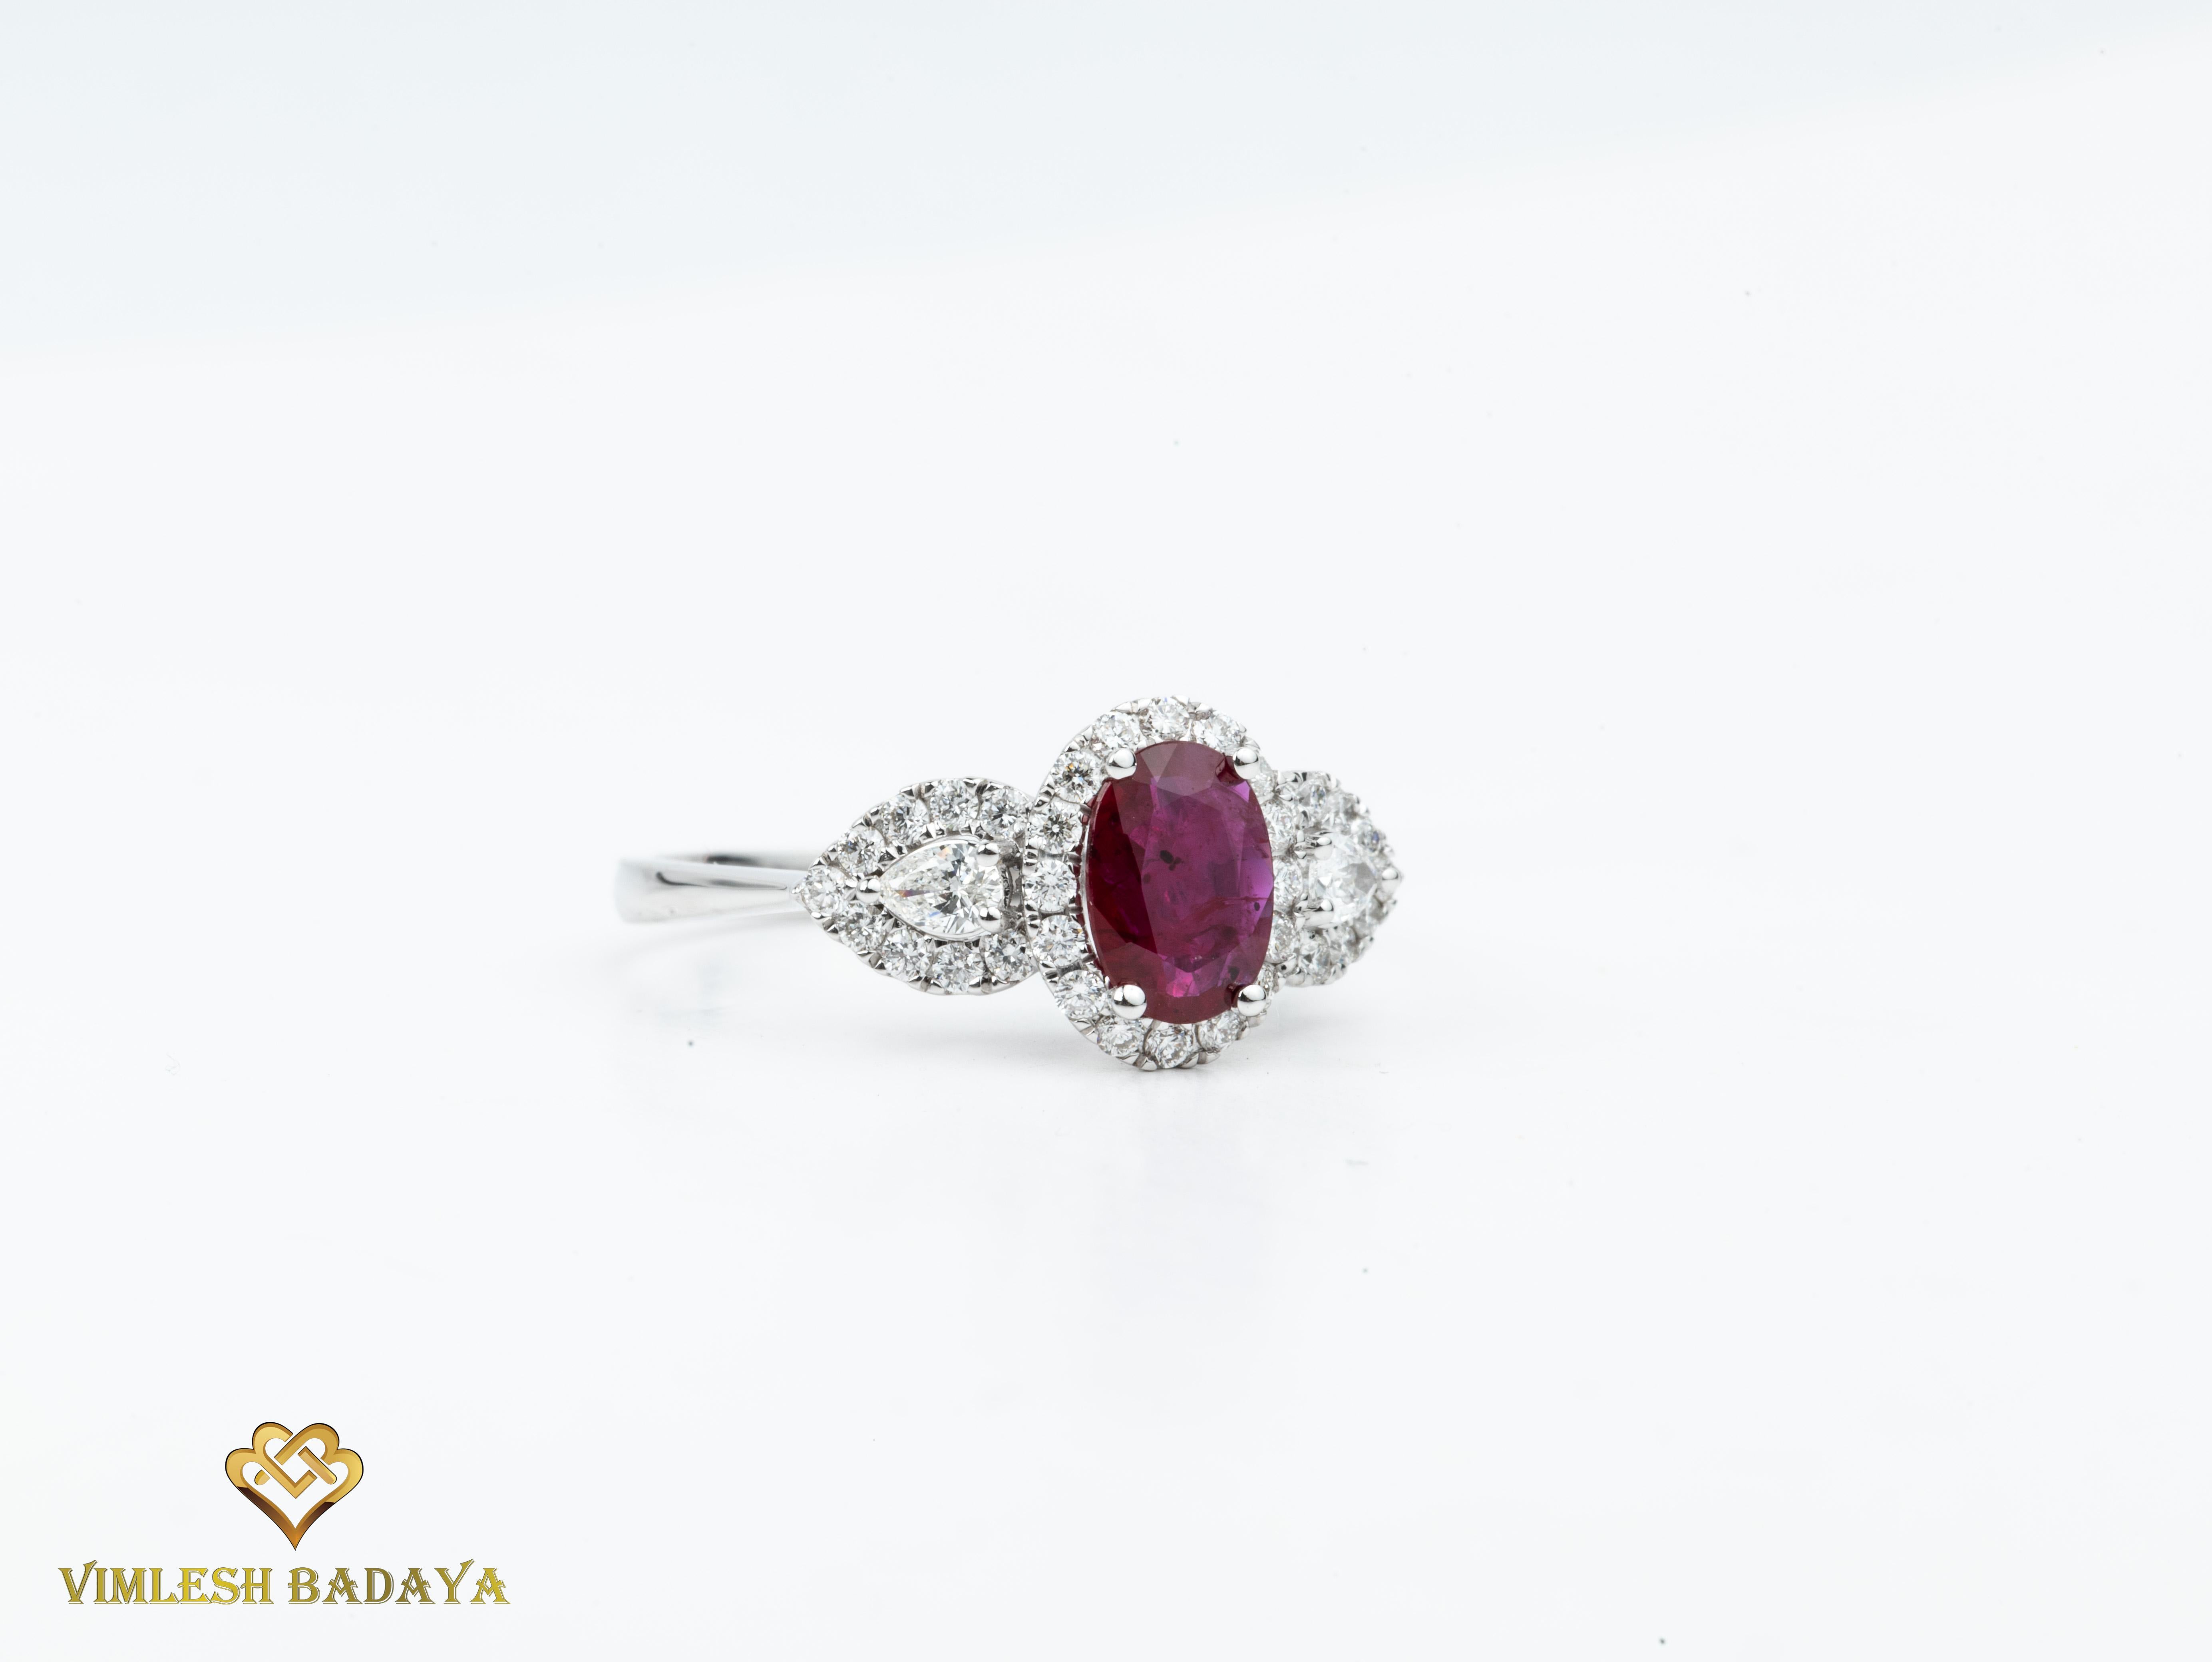 Oval Ruby Diamond Tapper Baguette Round Cut Double Halo Engagement Ring

Available in 18k white gold.

Same design can be made also with other custom gemstones per request.

Product details:

- Solid gold

- Diamond - approx. 0.45 carat

- Ruby -